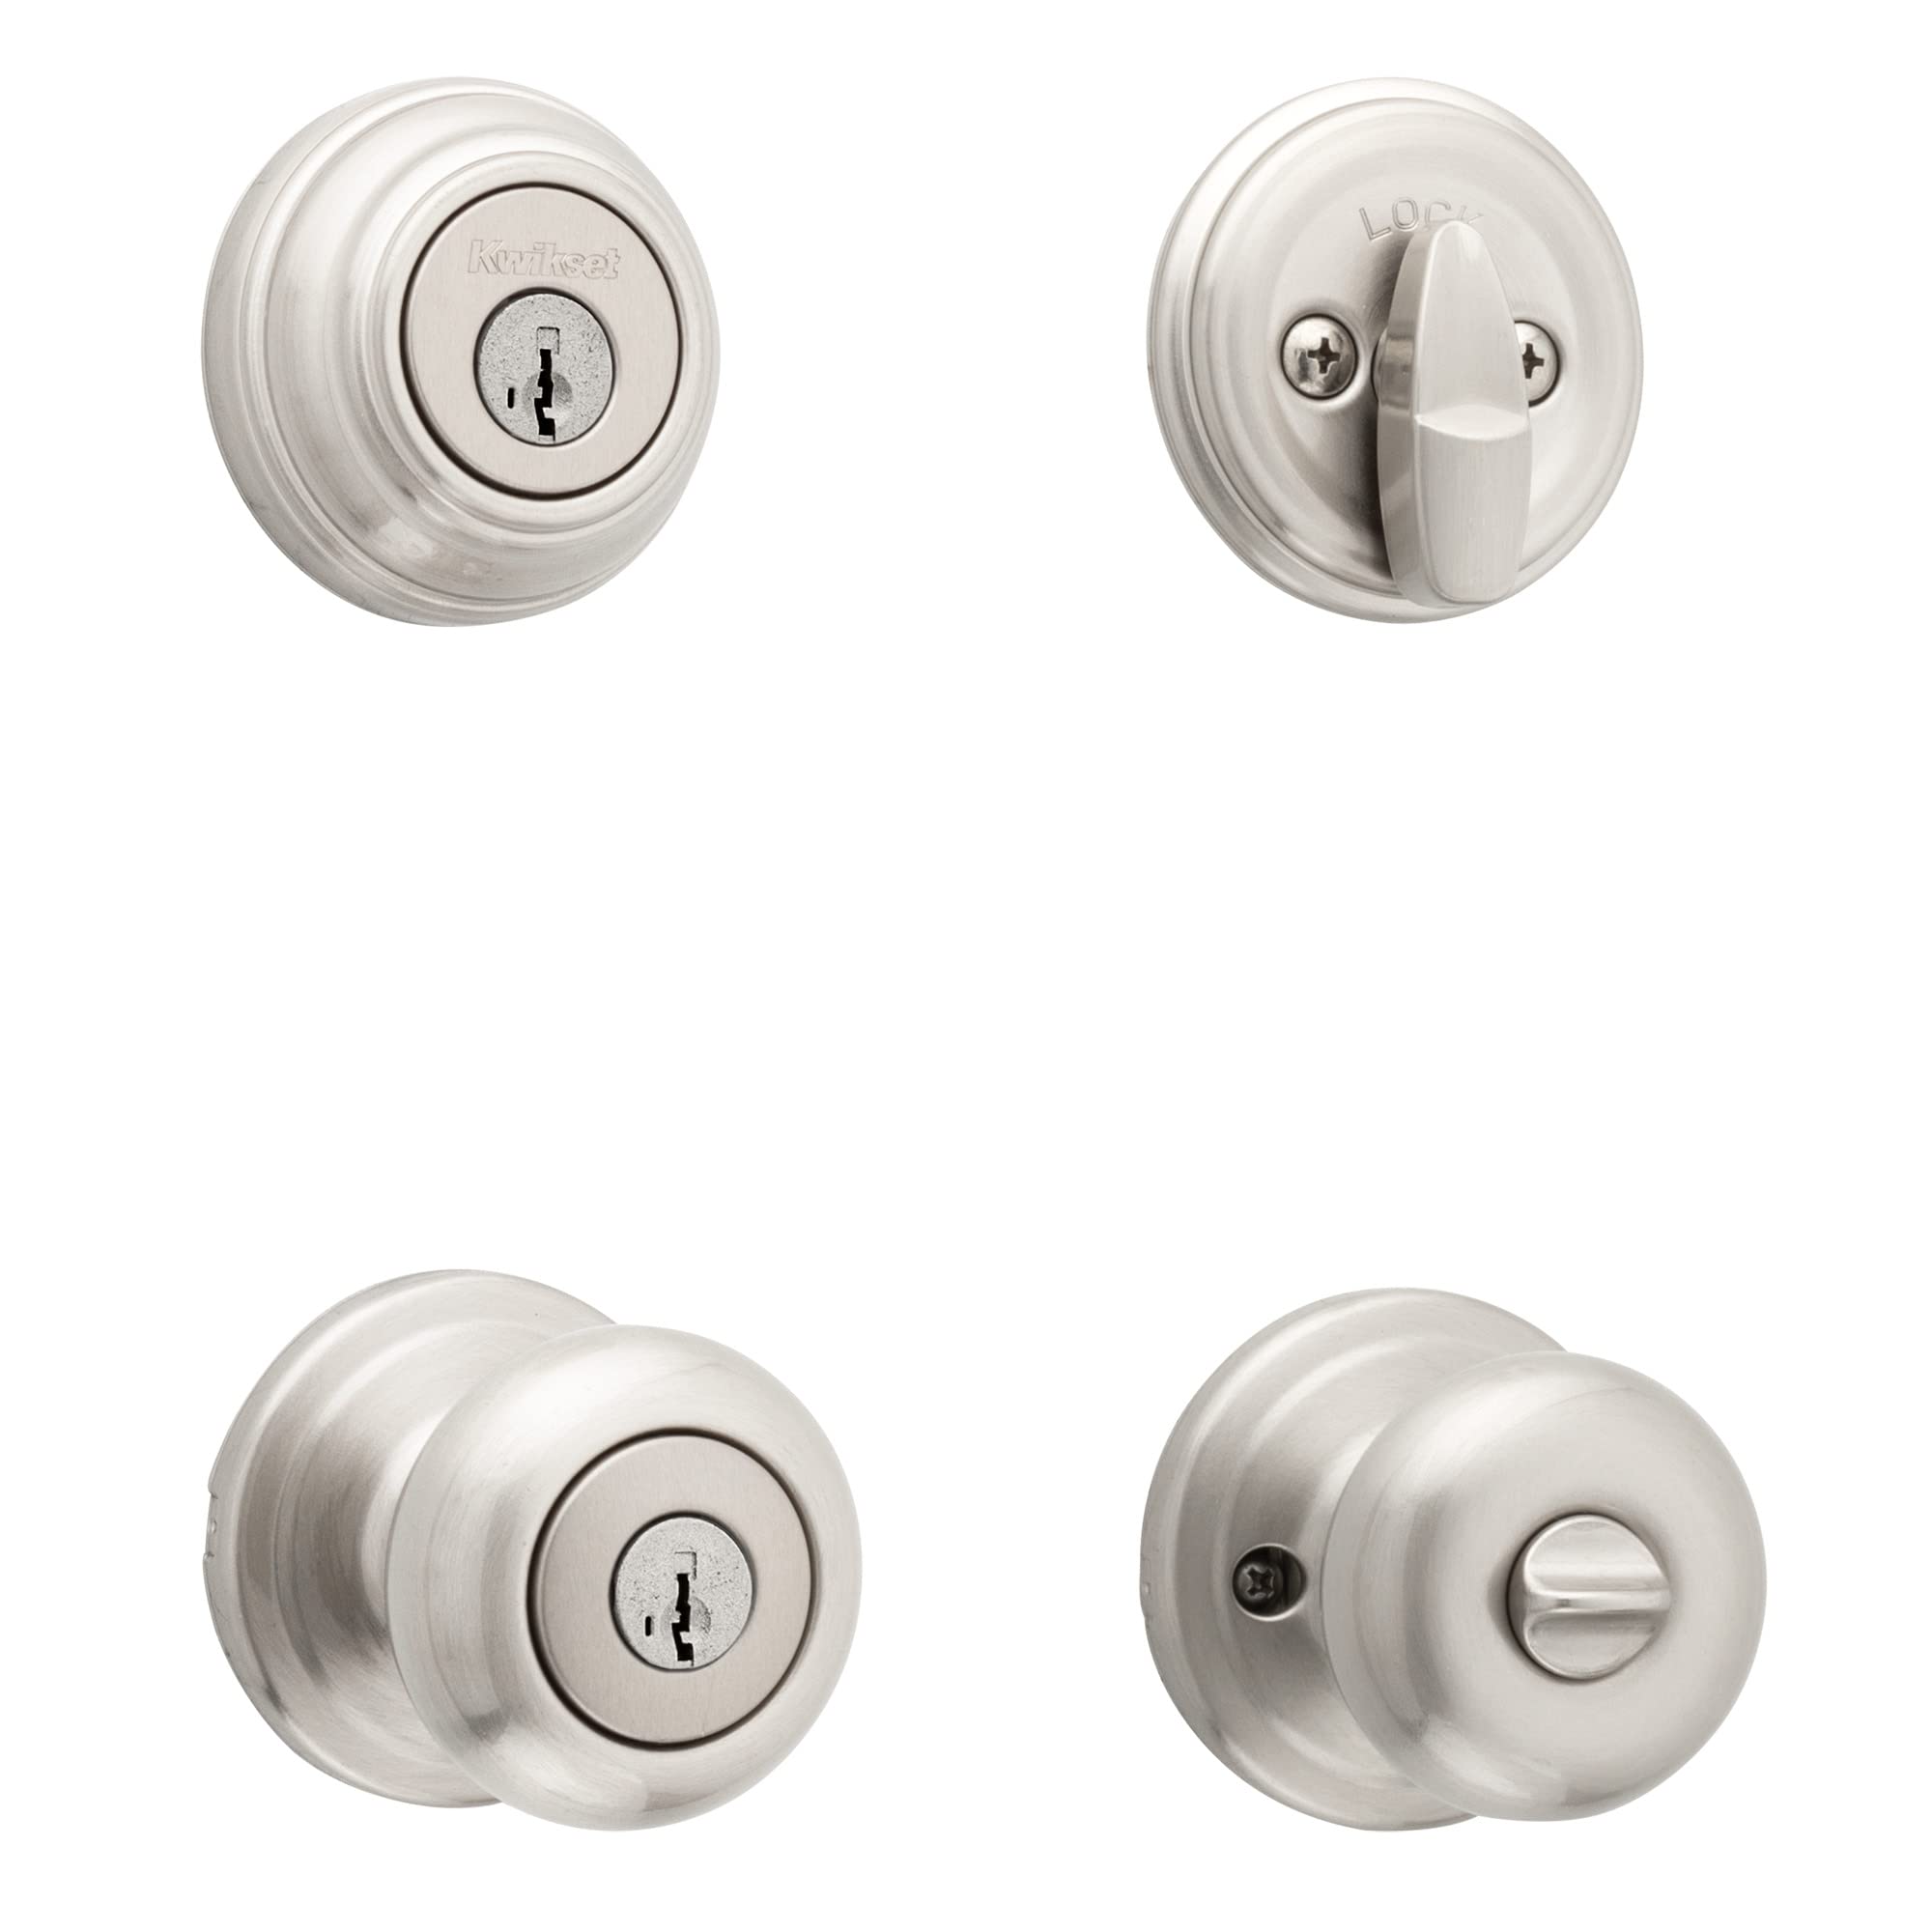 Book Cover Kwikset Juno Keyed Entry Door Knob and Single Cylinder Deadbolt Combo Pack with Microban Antimicrobial Protection Featuring SmartKey Security in Satin Nickel